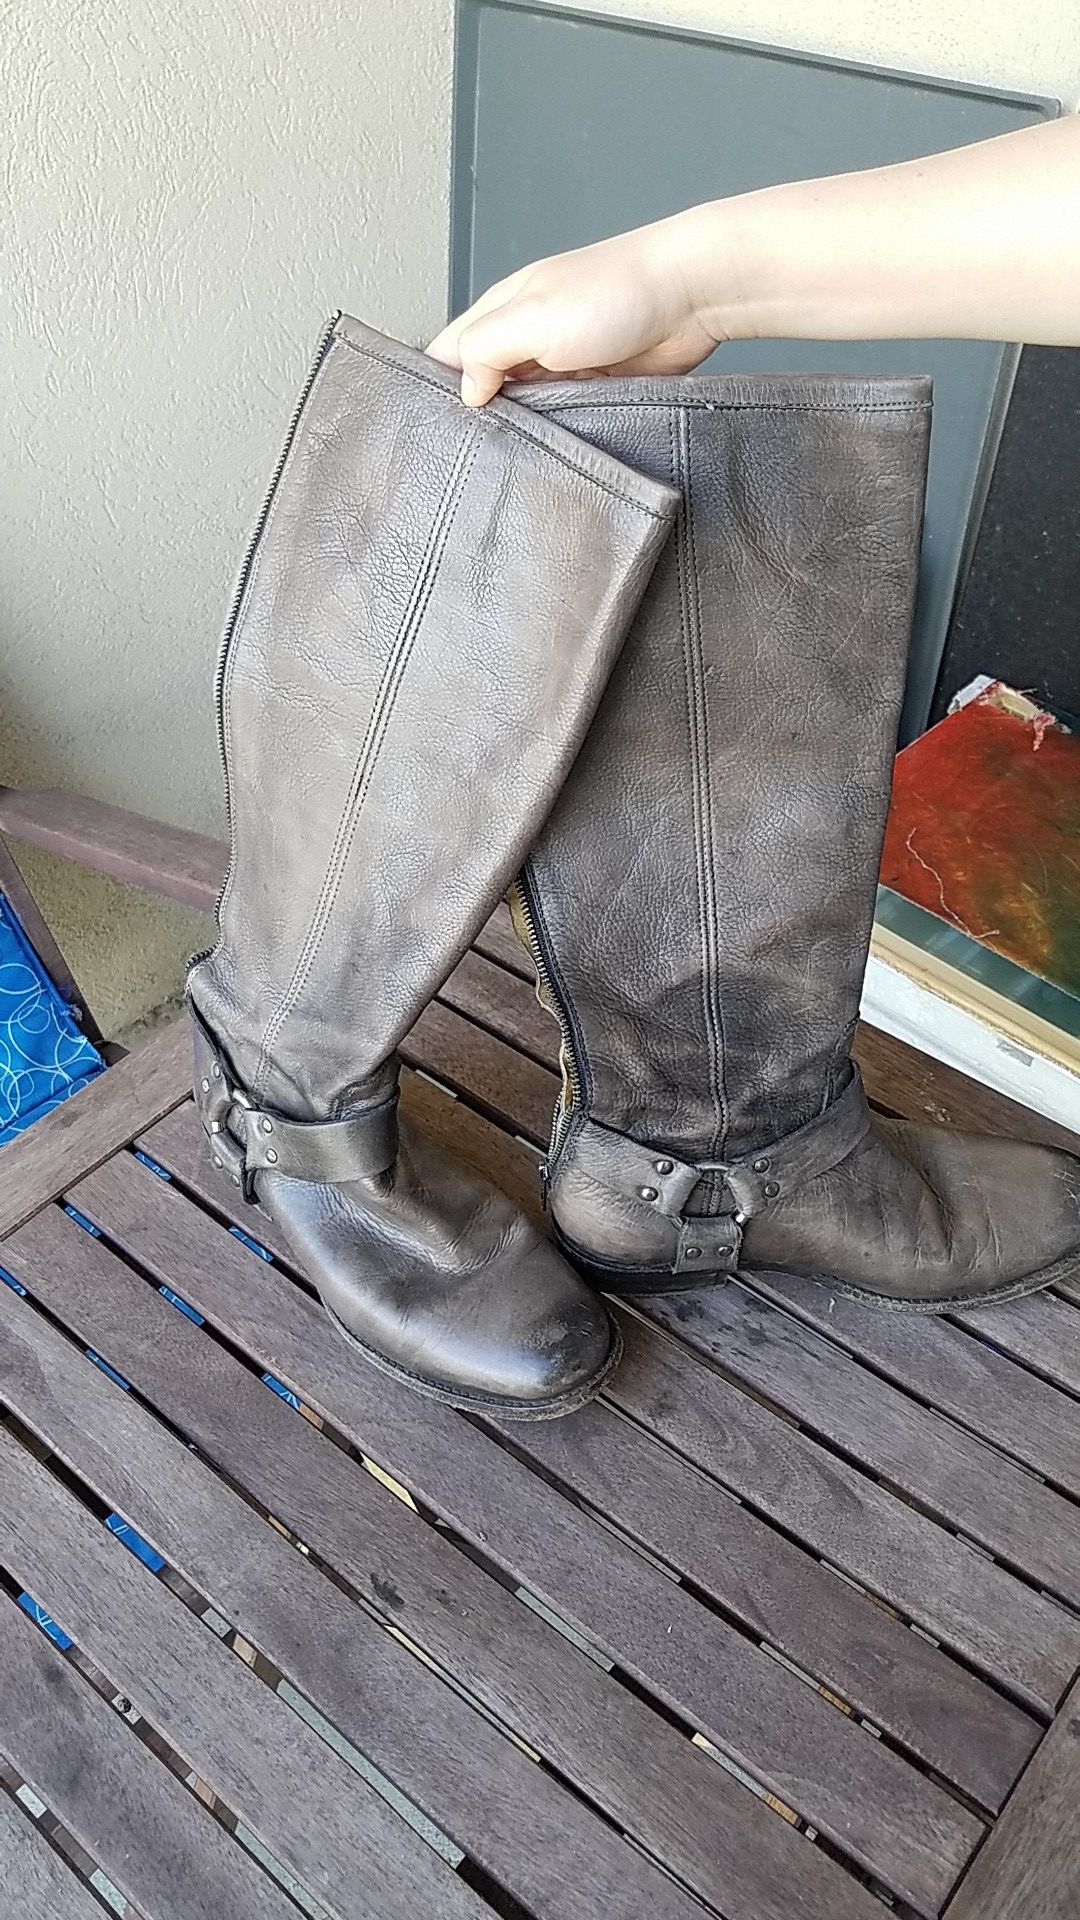 The Frye Company genuine leather boots